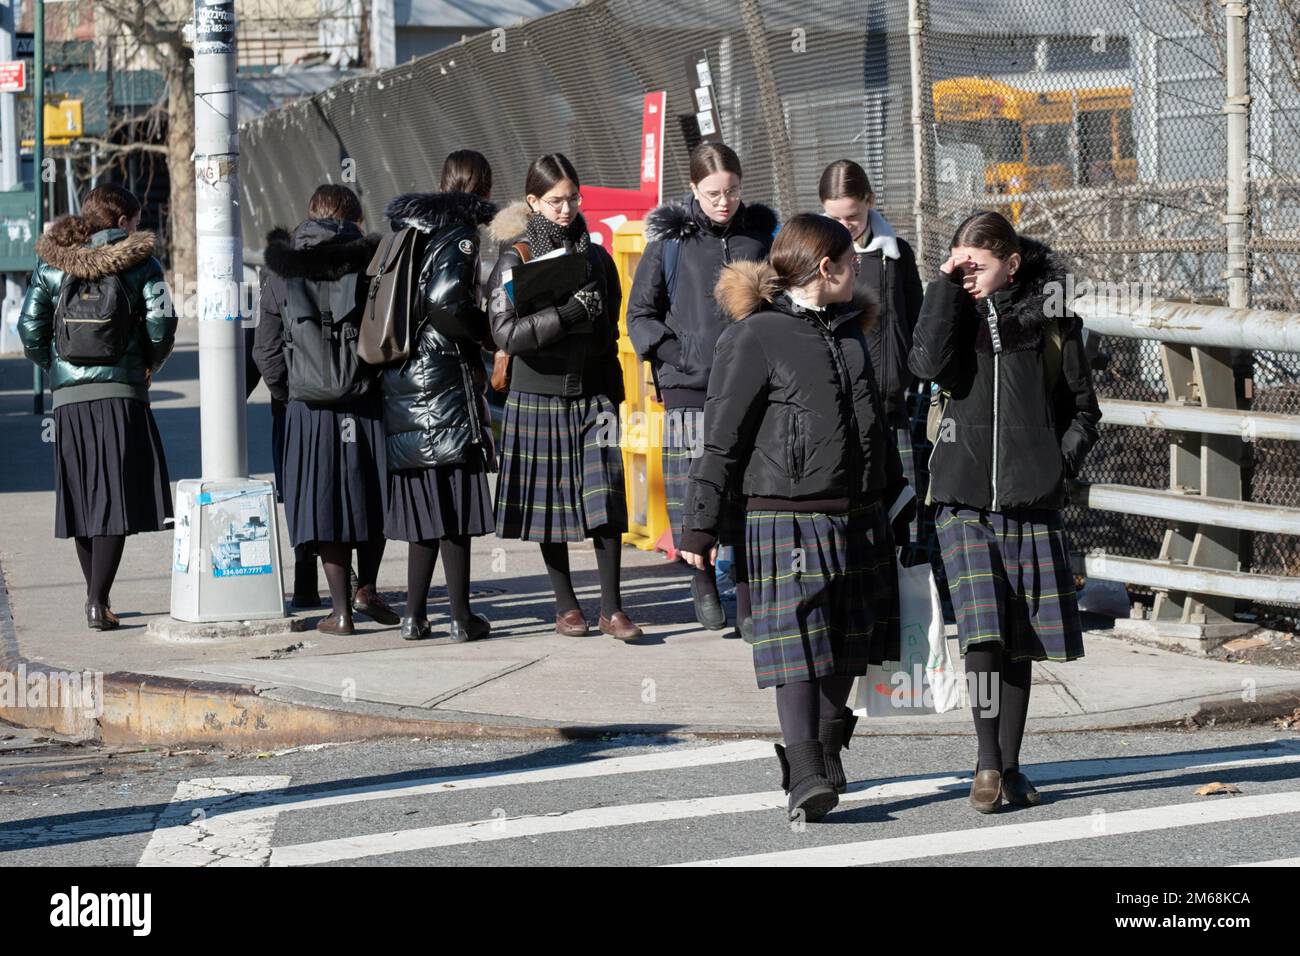 Orthodox jewish school girls wearing their uniform, return home after classes. There are 2 groups, each with different skirts. In brooklyn, New York. Stock Photo